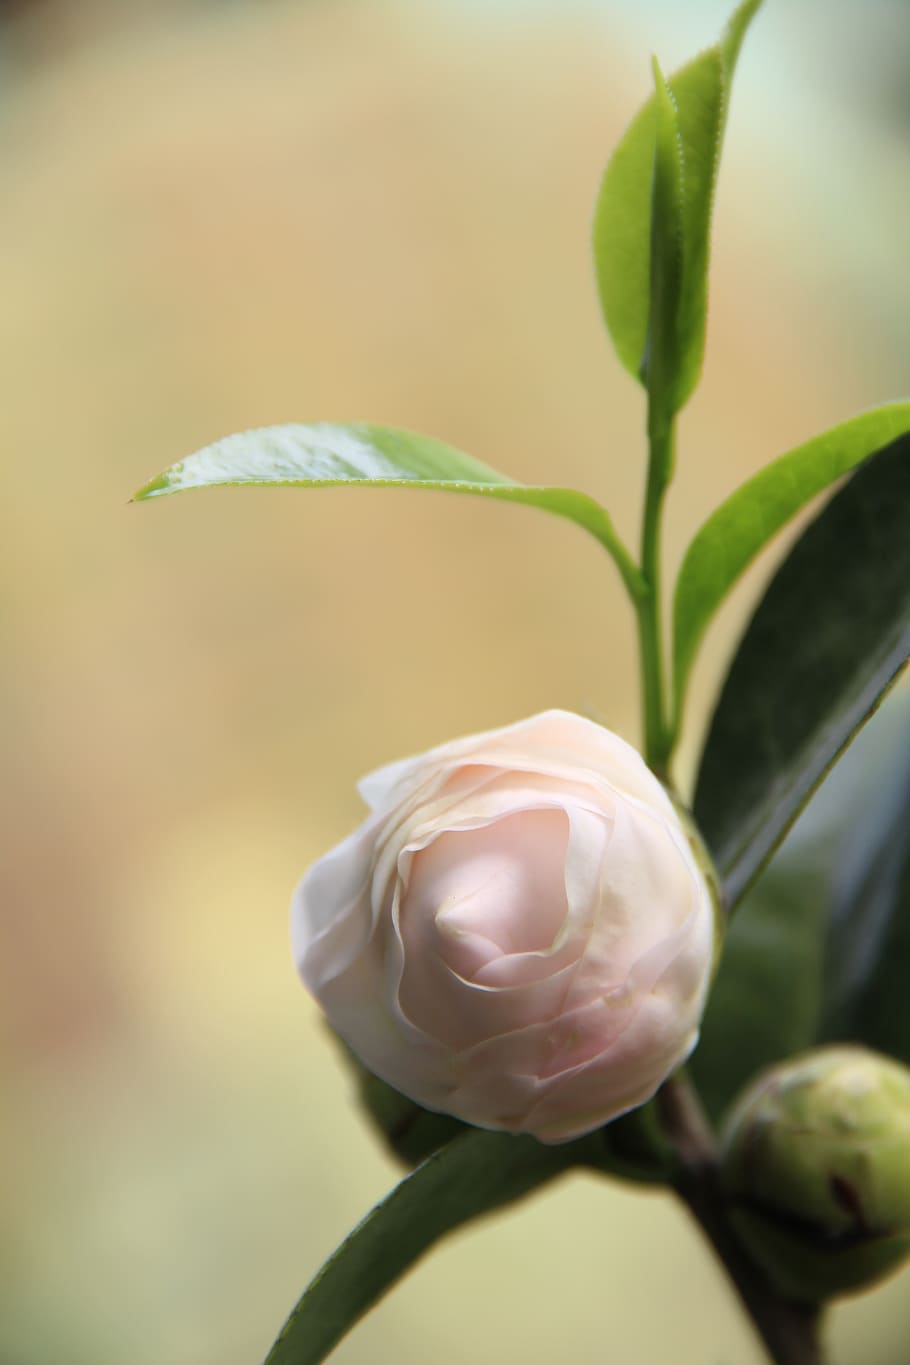 camellia．, pink．, summer, plant, close-up, beauty in nature